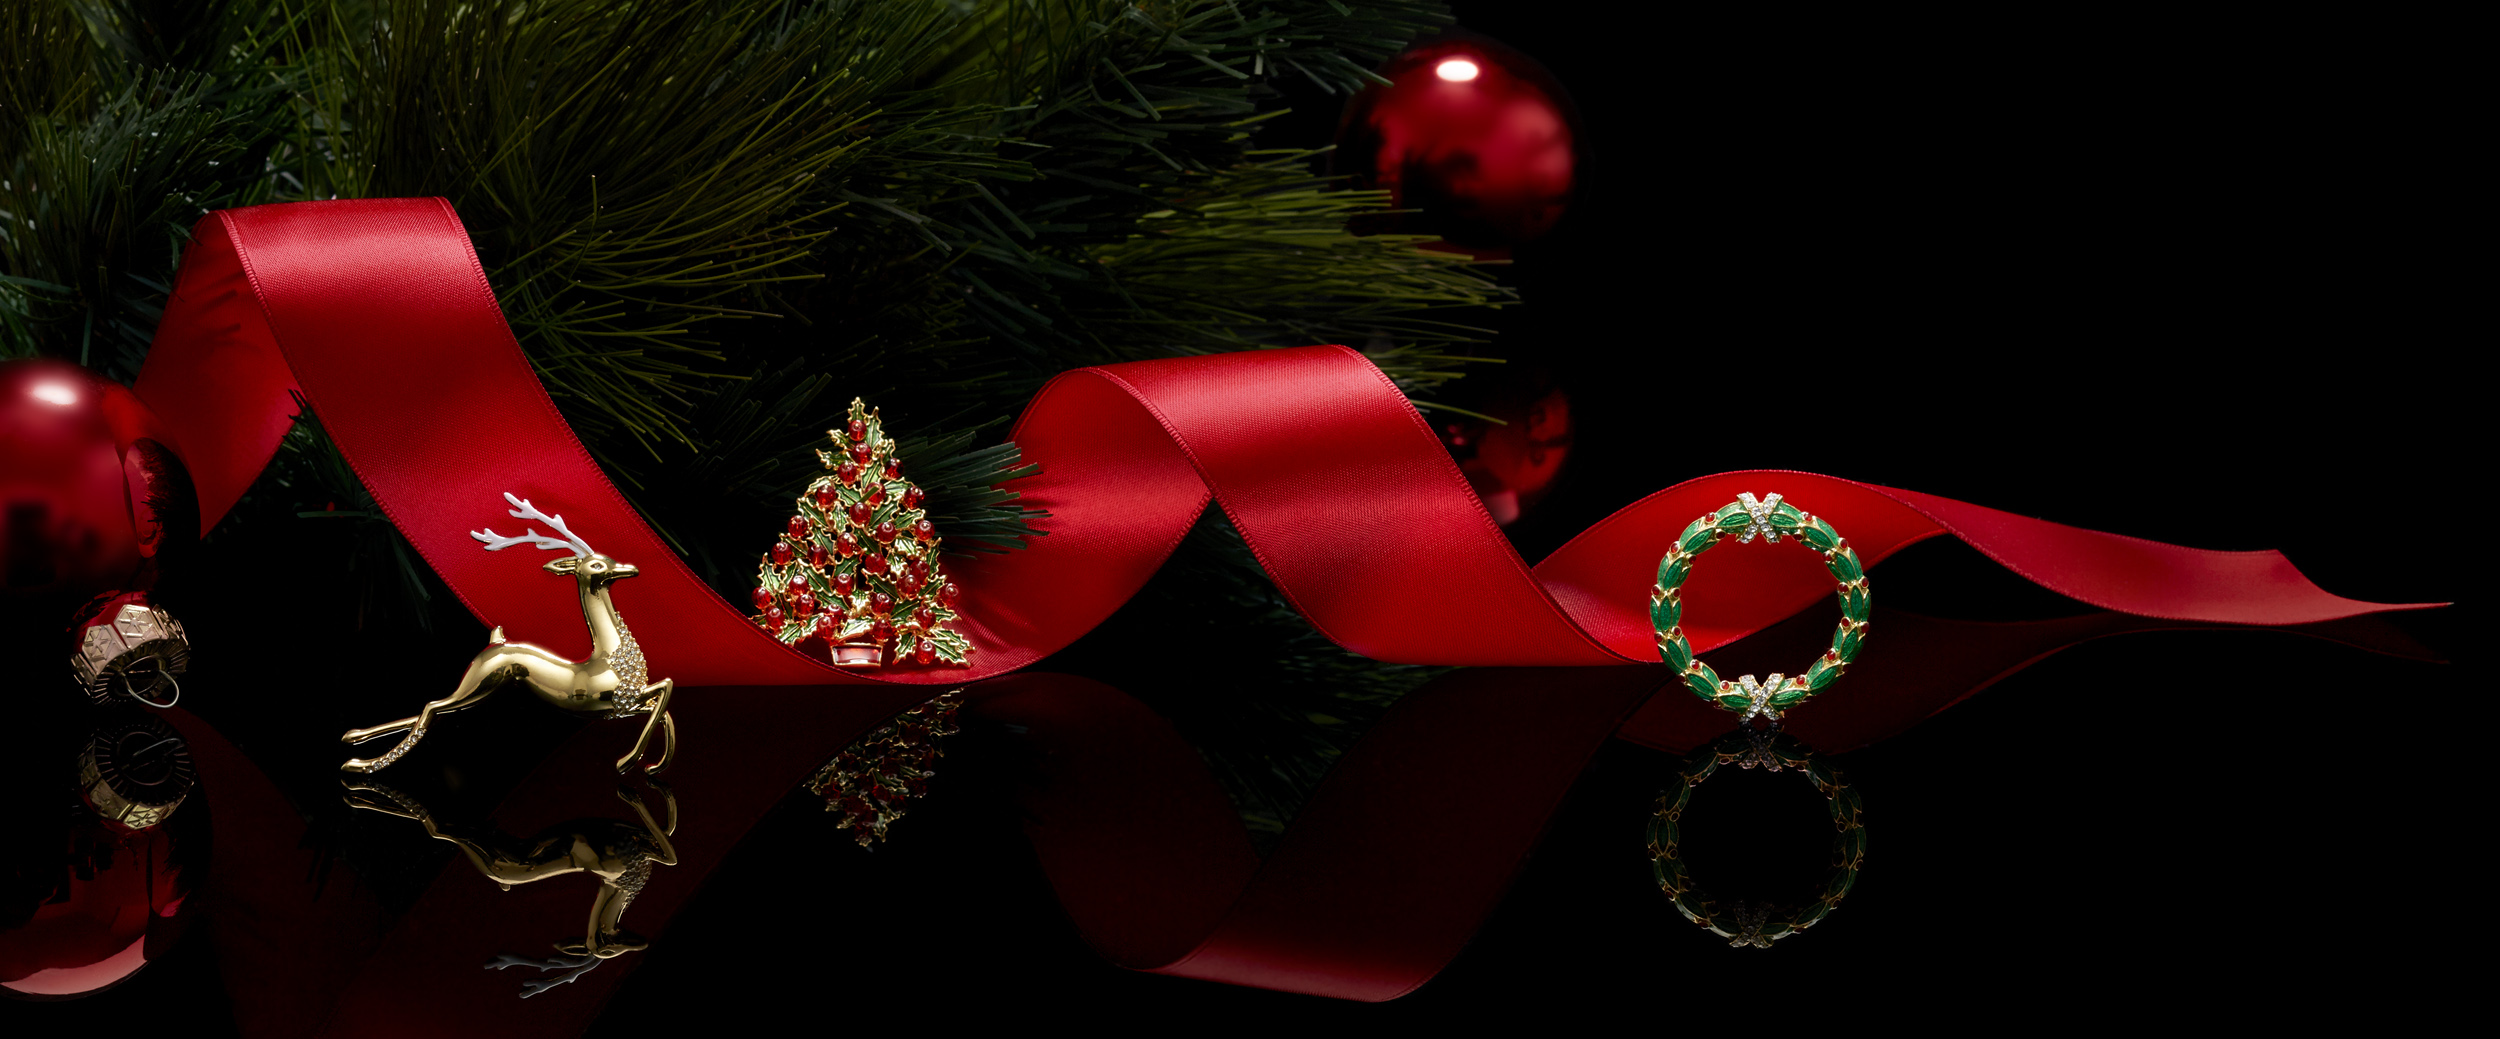 Holiday pins e-commerce header with a red ribbon, tree branch, reflection, and black background